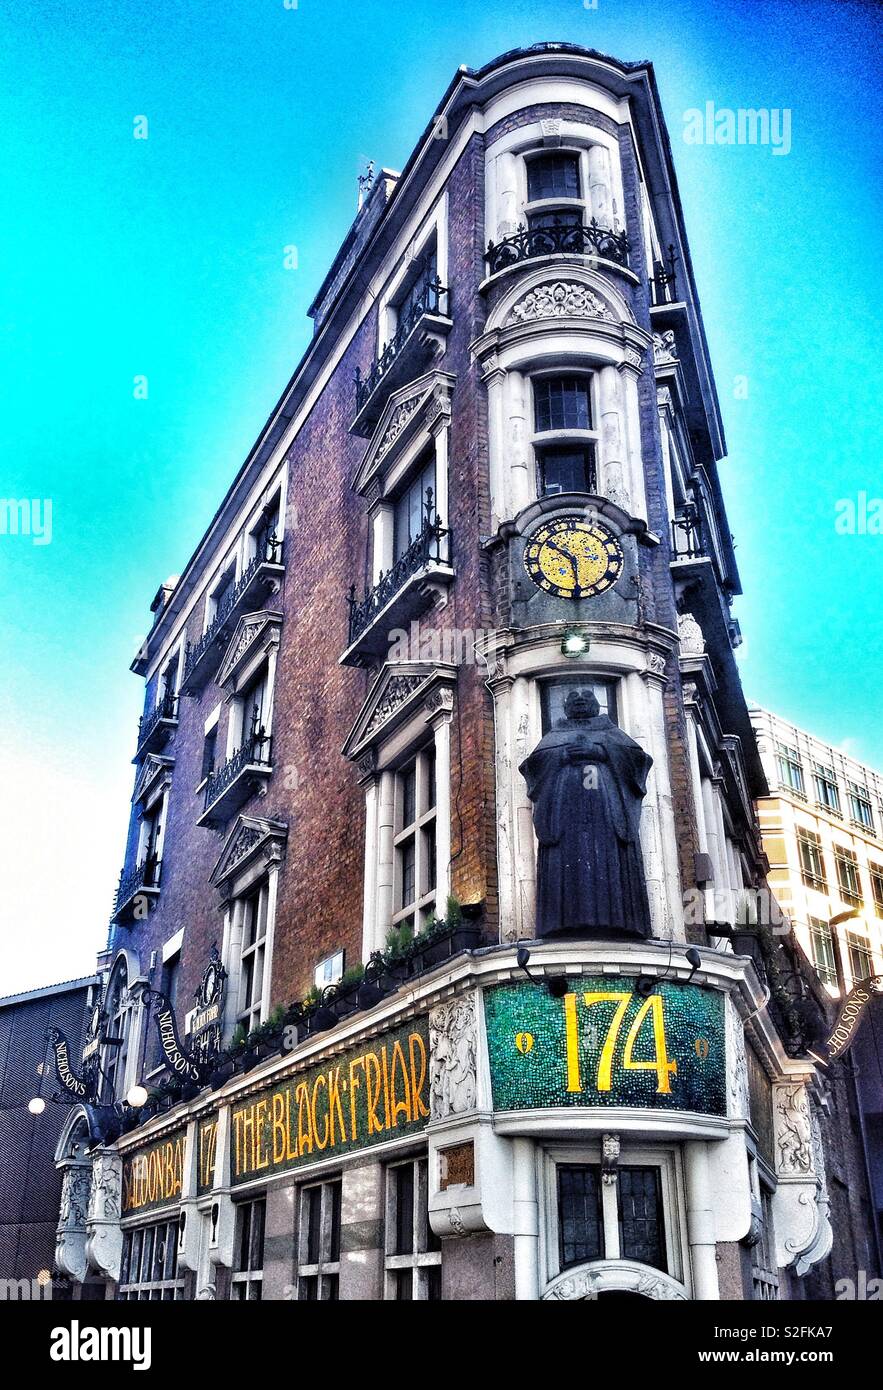 The wonderful Victorian wedge-shaped pub, The Blackfriar, in London, built in 1875 Stock Photo